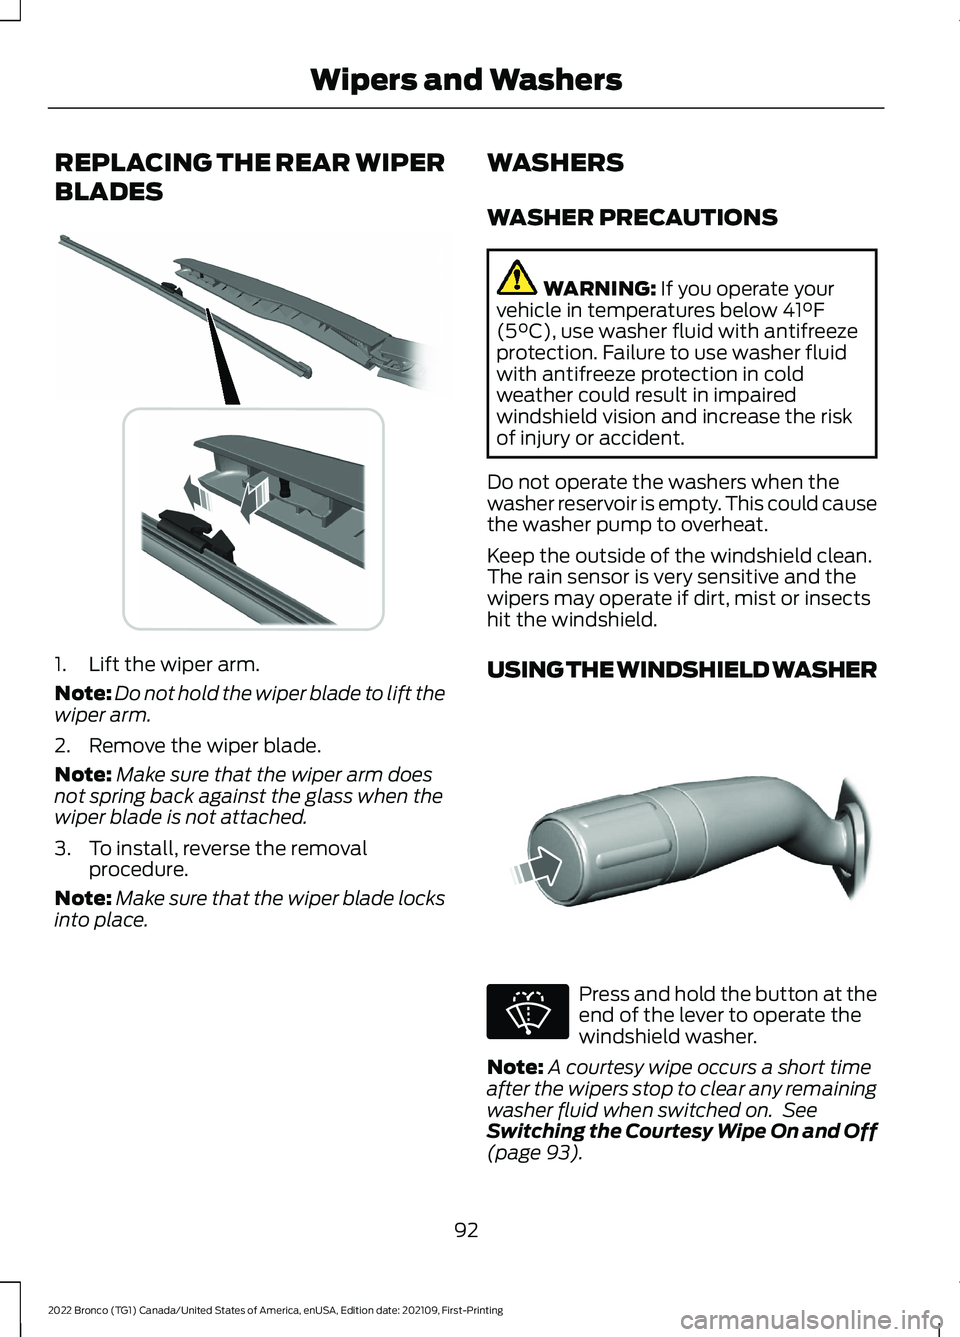 FORD BRONCO 2022  Owners Manual REPLACING THE REAR WIPER
BLADES
1.Lift the wiper arm.
Note:Do not hold the wiper blade to lift thewiper arm.
2.Remove the wiper blade.
Note:Make sure that the wiper arm doesnot spring back against the